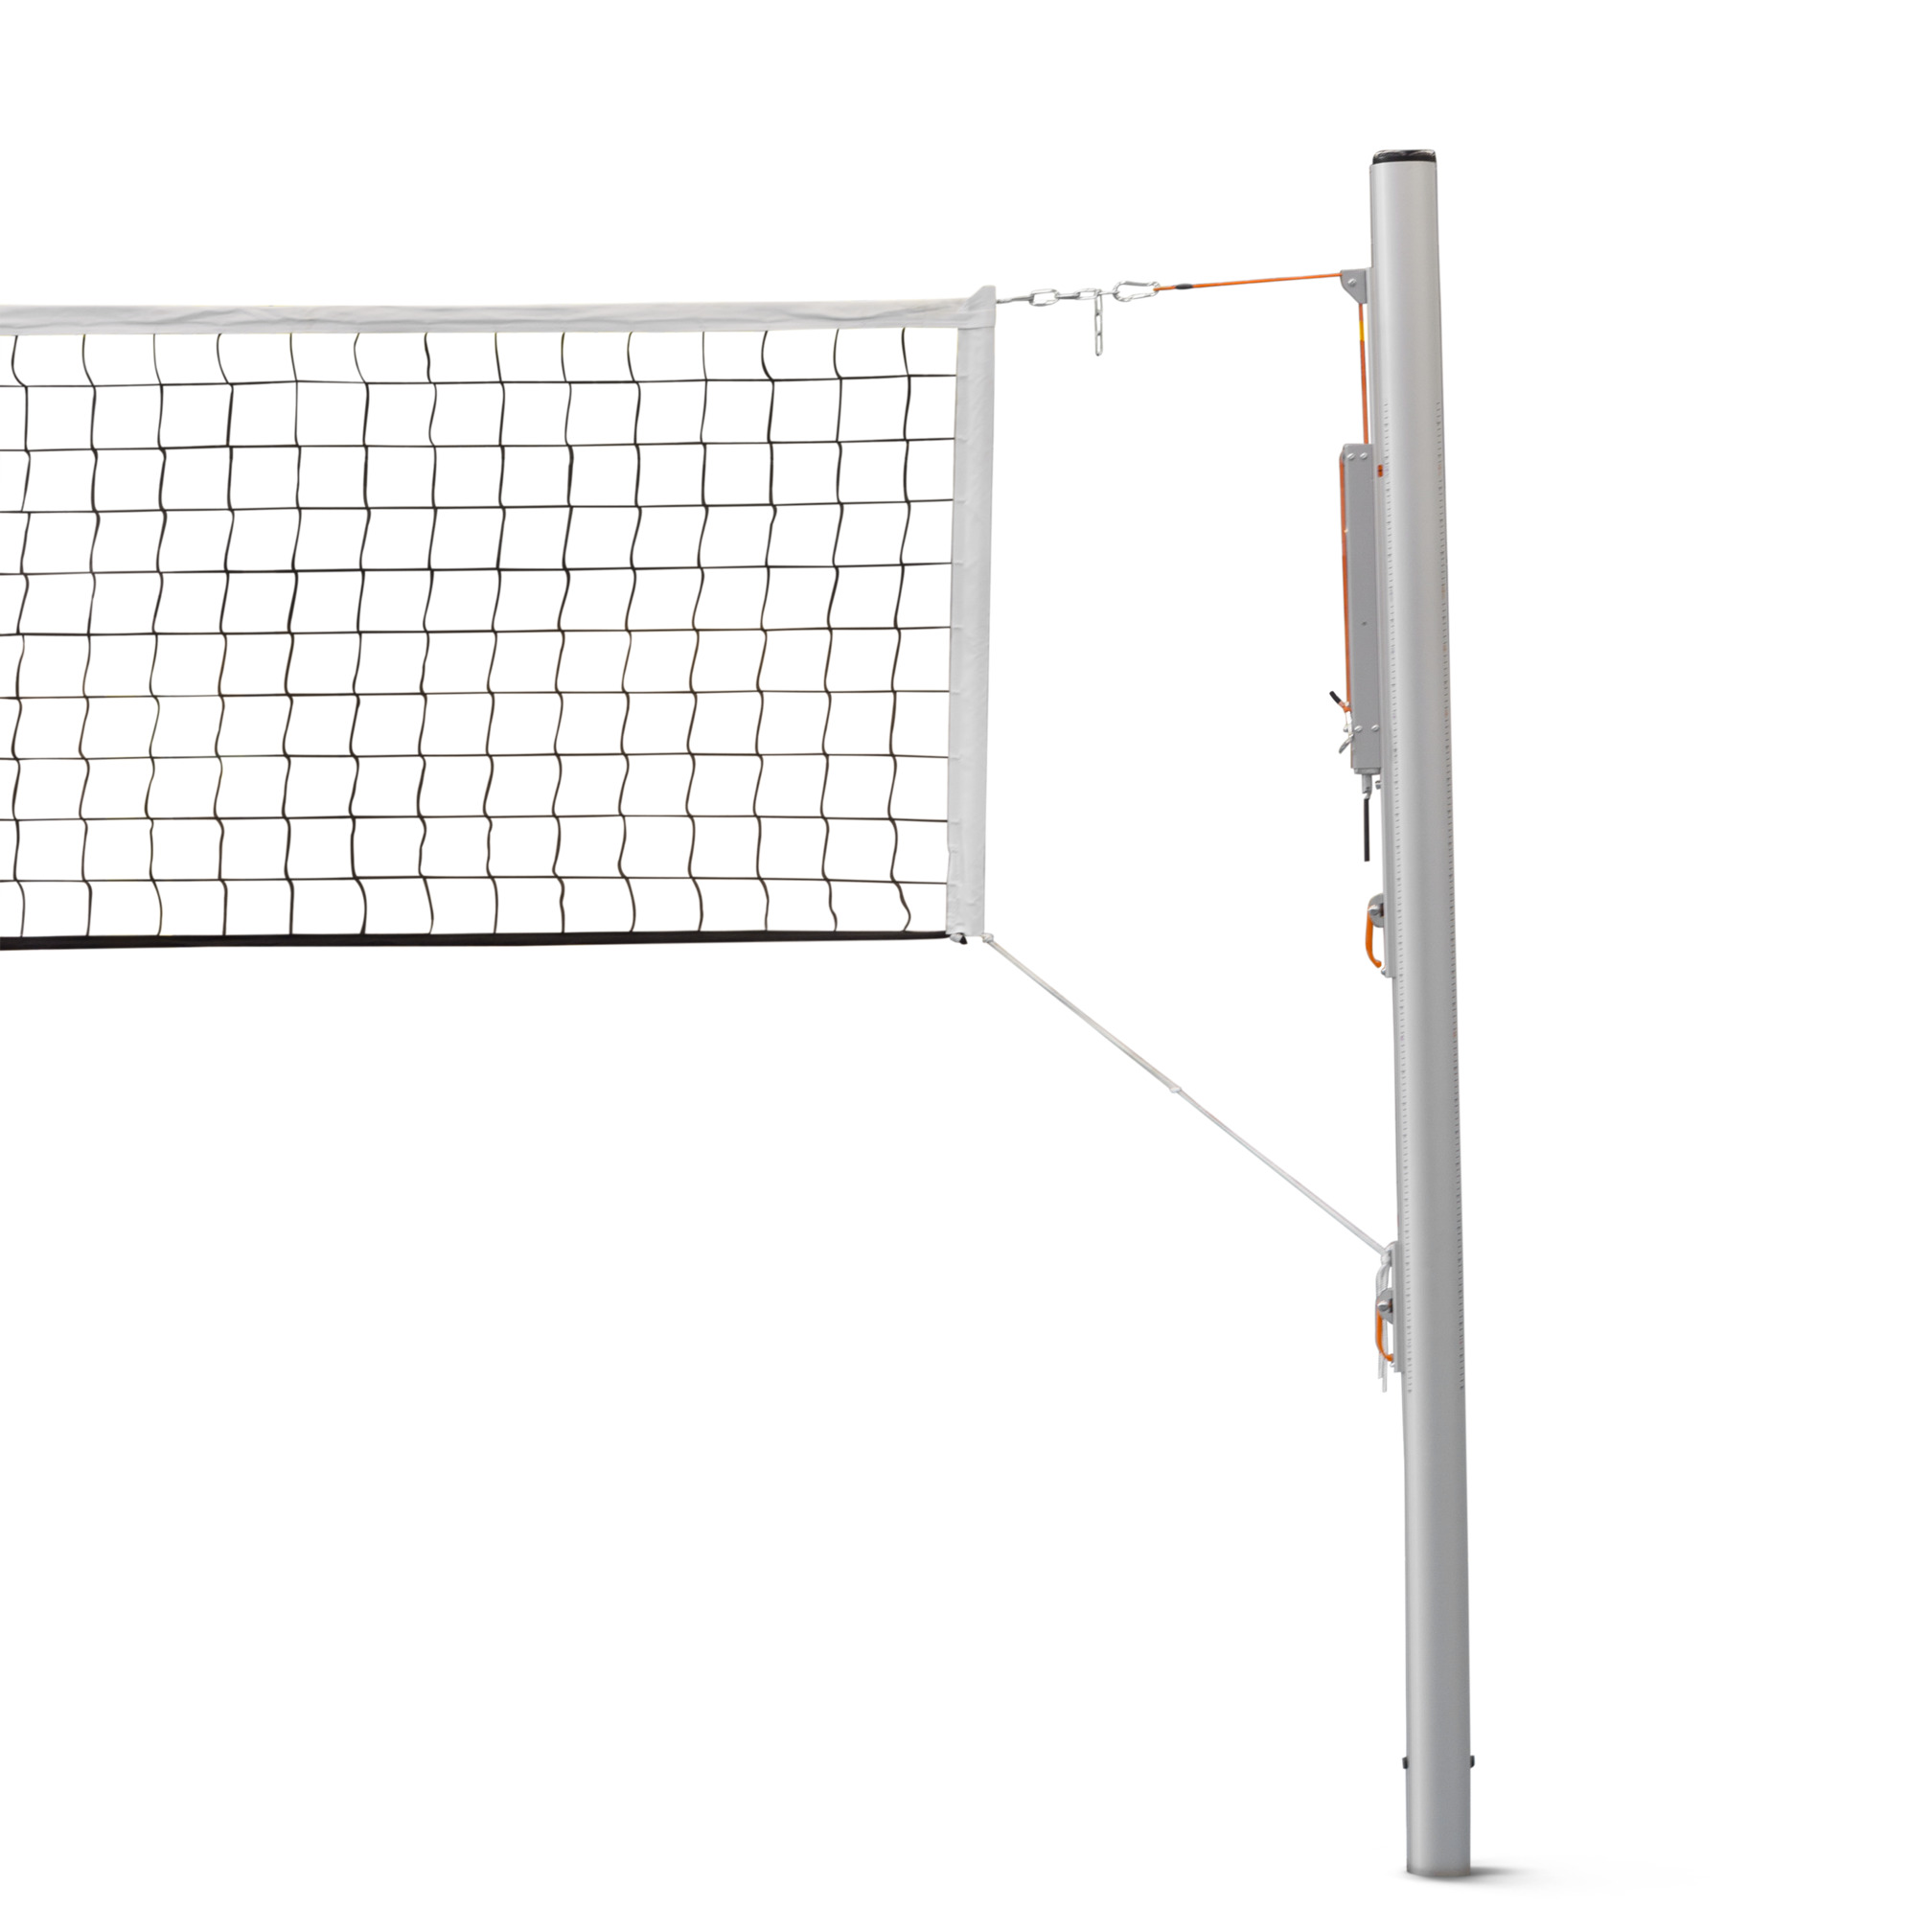 School and recreational volleyball net